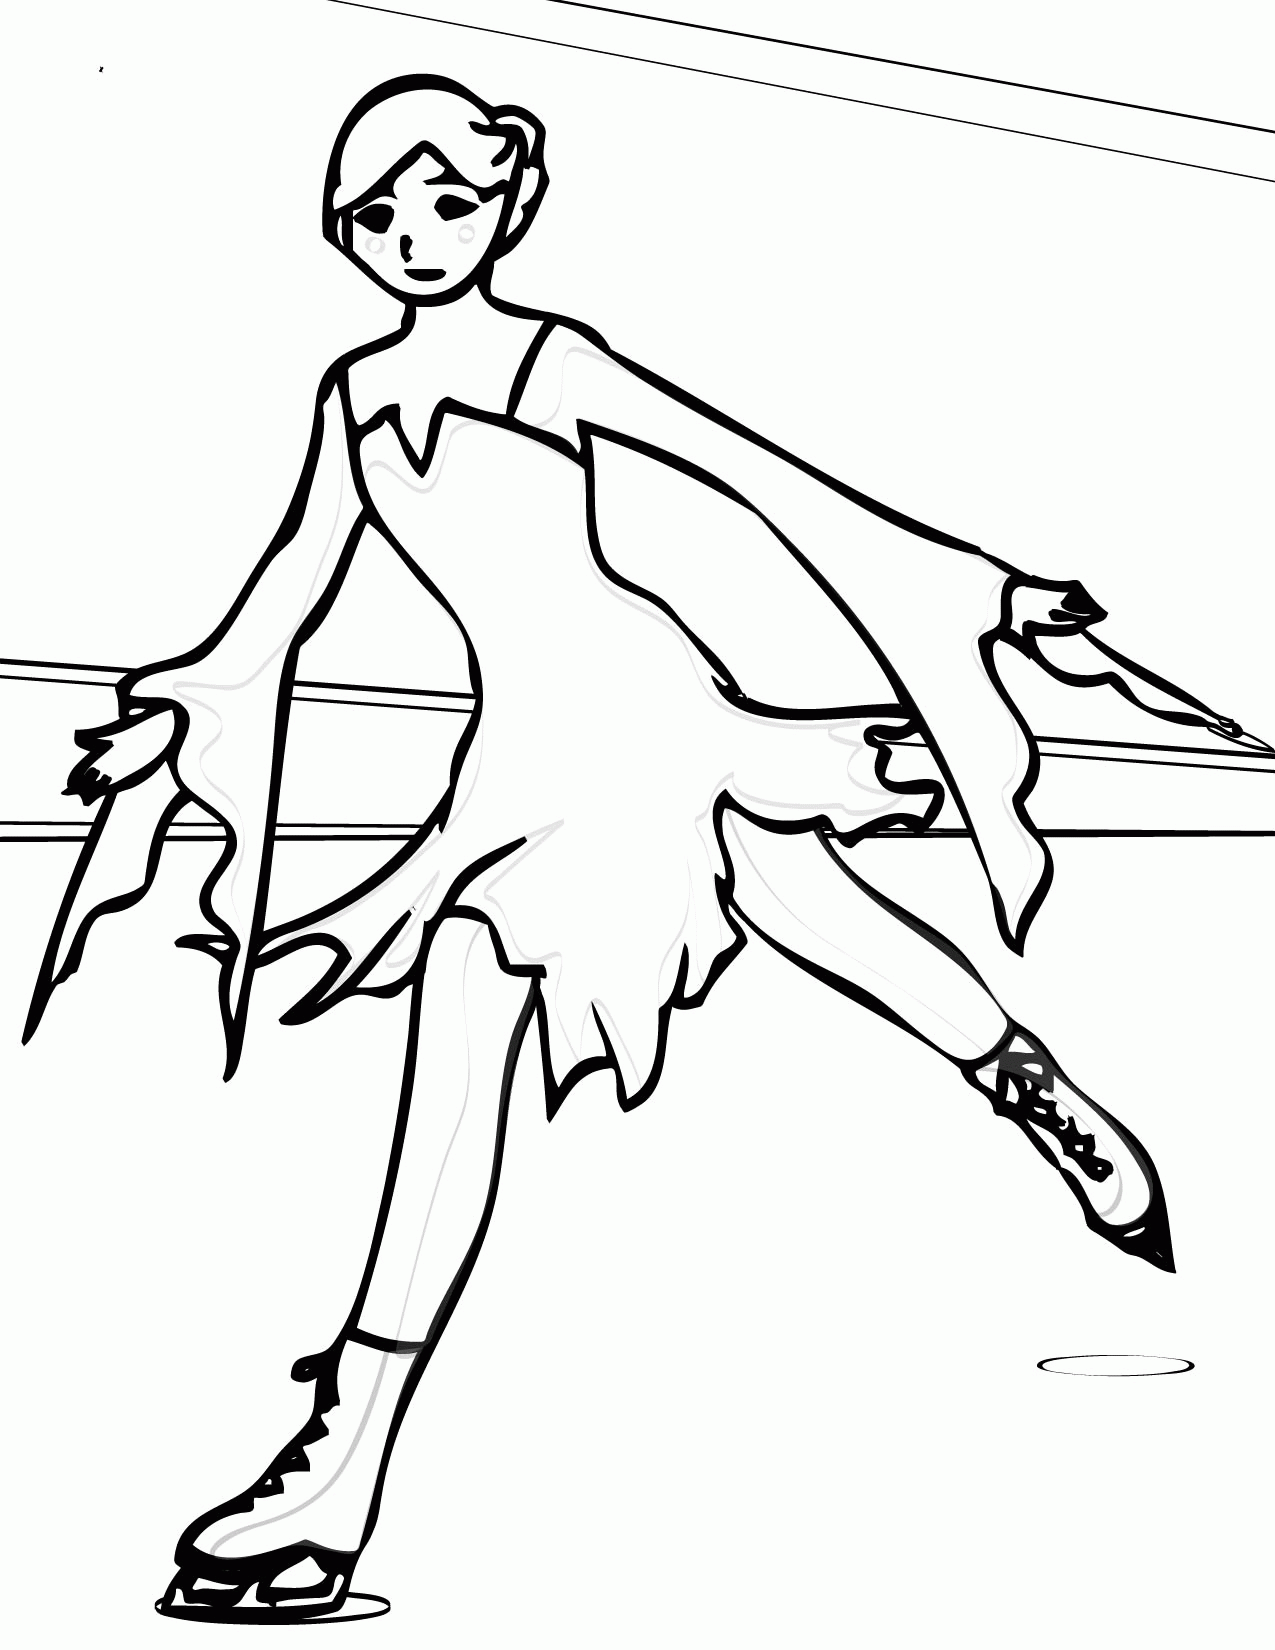 Ice Skating Coloring Pages Printable - Coloring Page